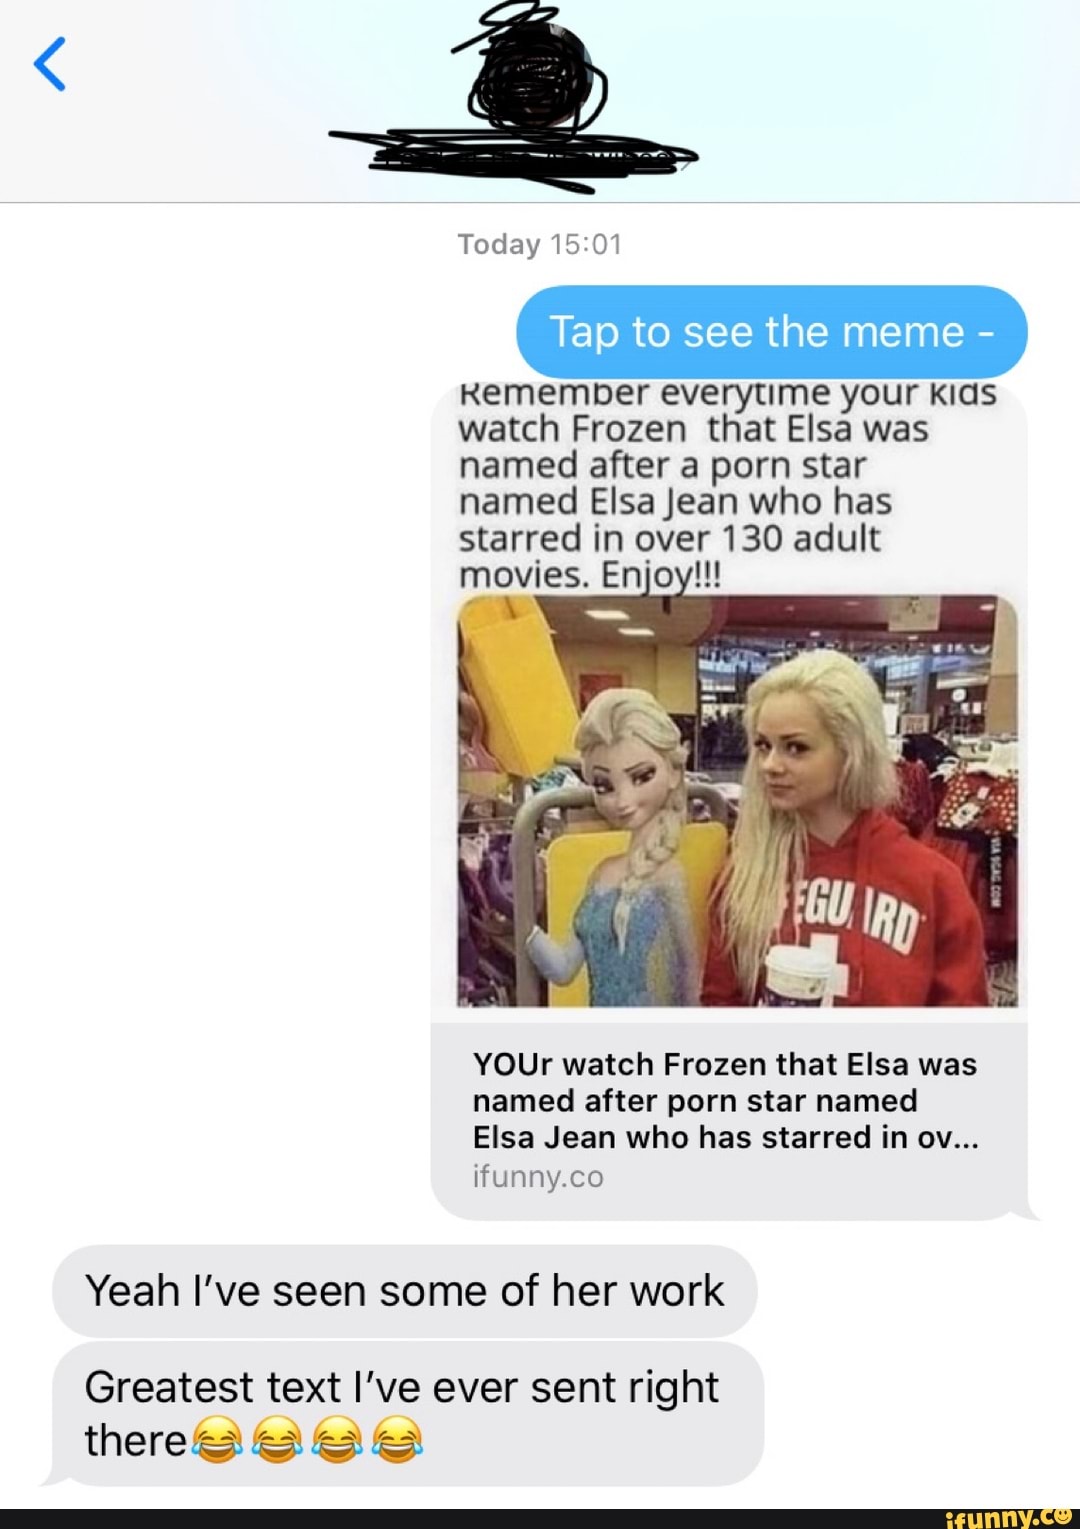 1080px x 1529px - Today Tap to see the meme - Kemember everytime your kids watch Frozen that  Elsa was named